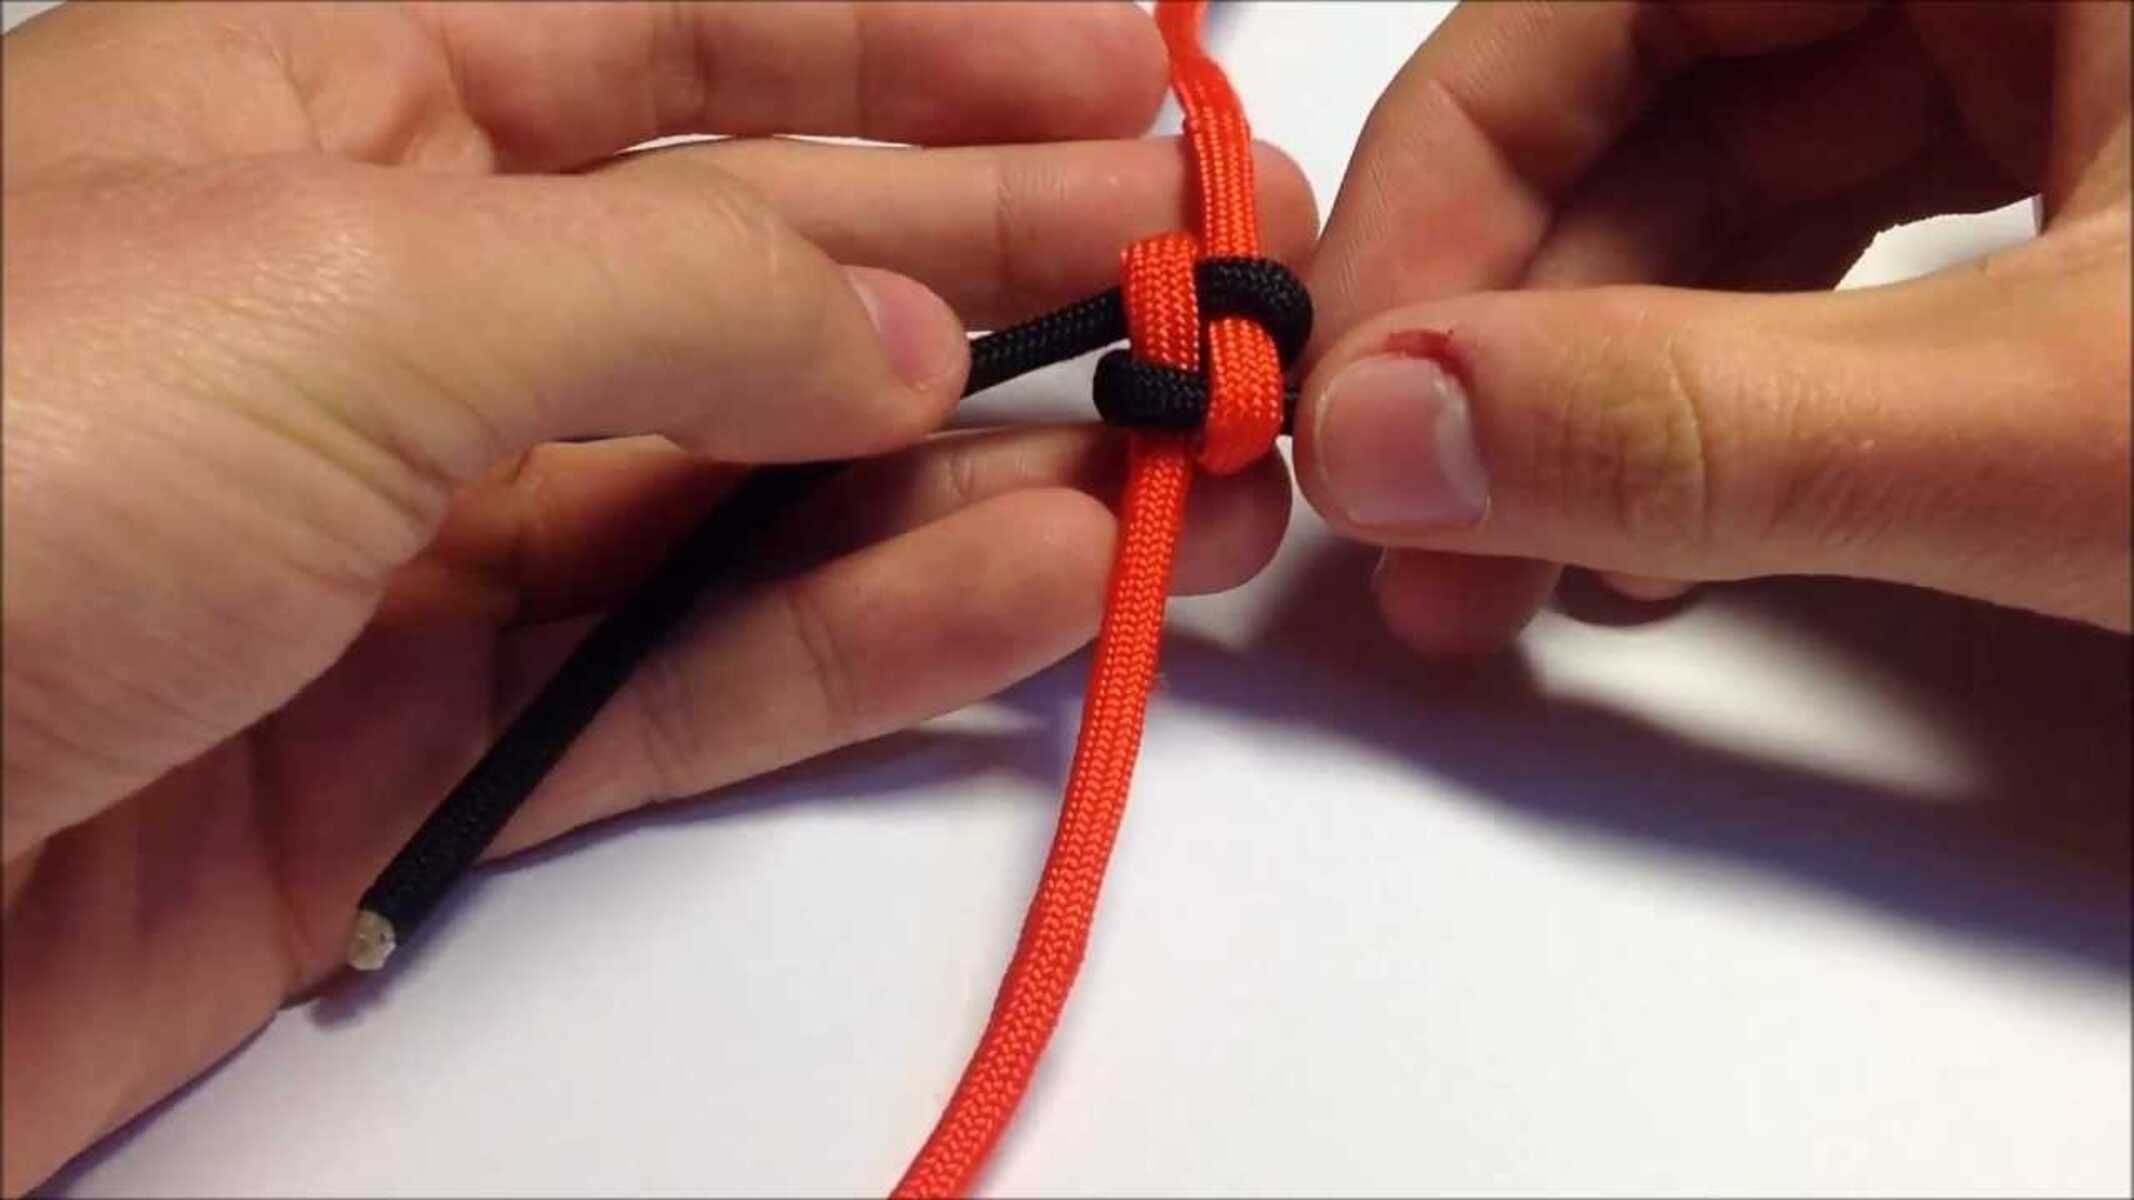 Learning The Art Of Tying Perfect Lanyard Knots